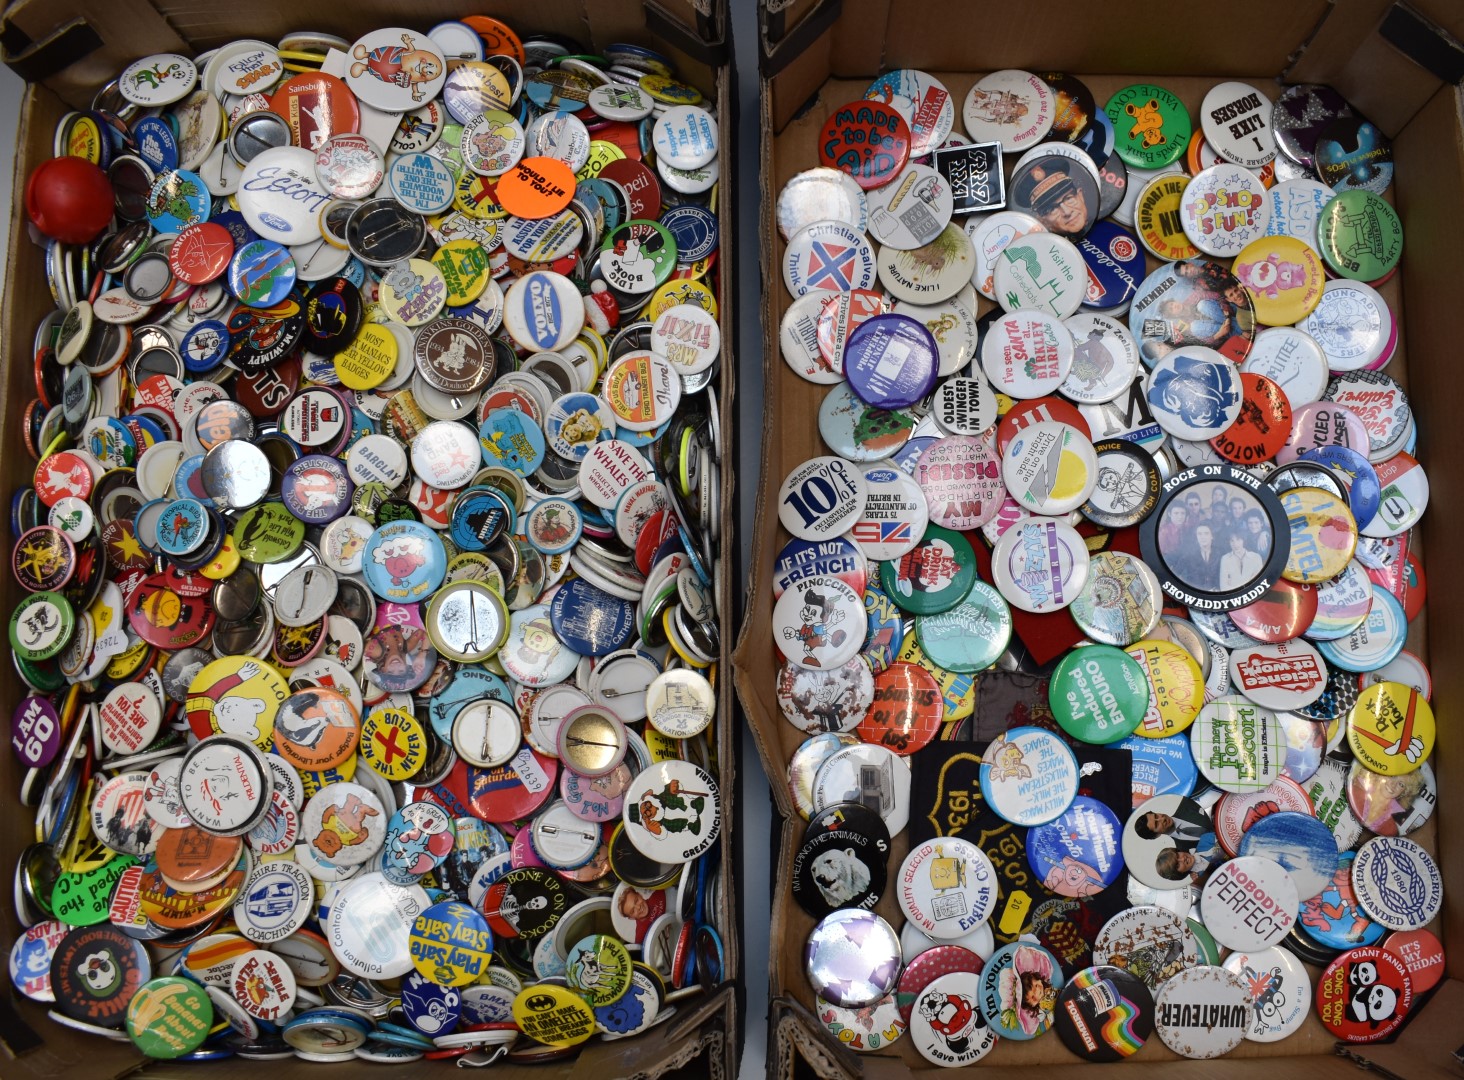 Over 1000 vintage and collectable badges including social history, advertising, humorous, slogans,